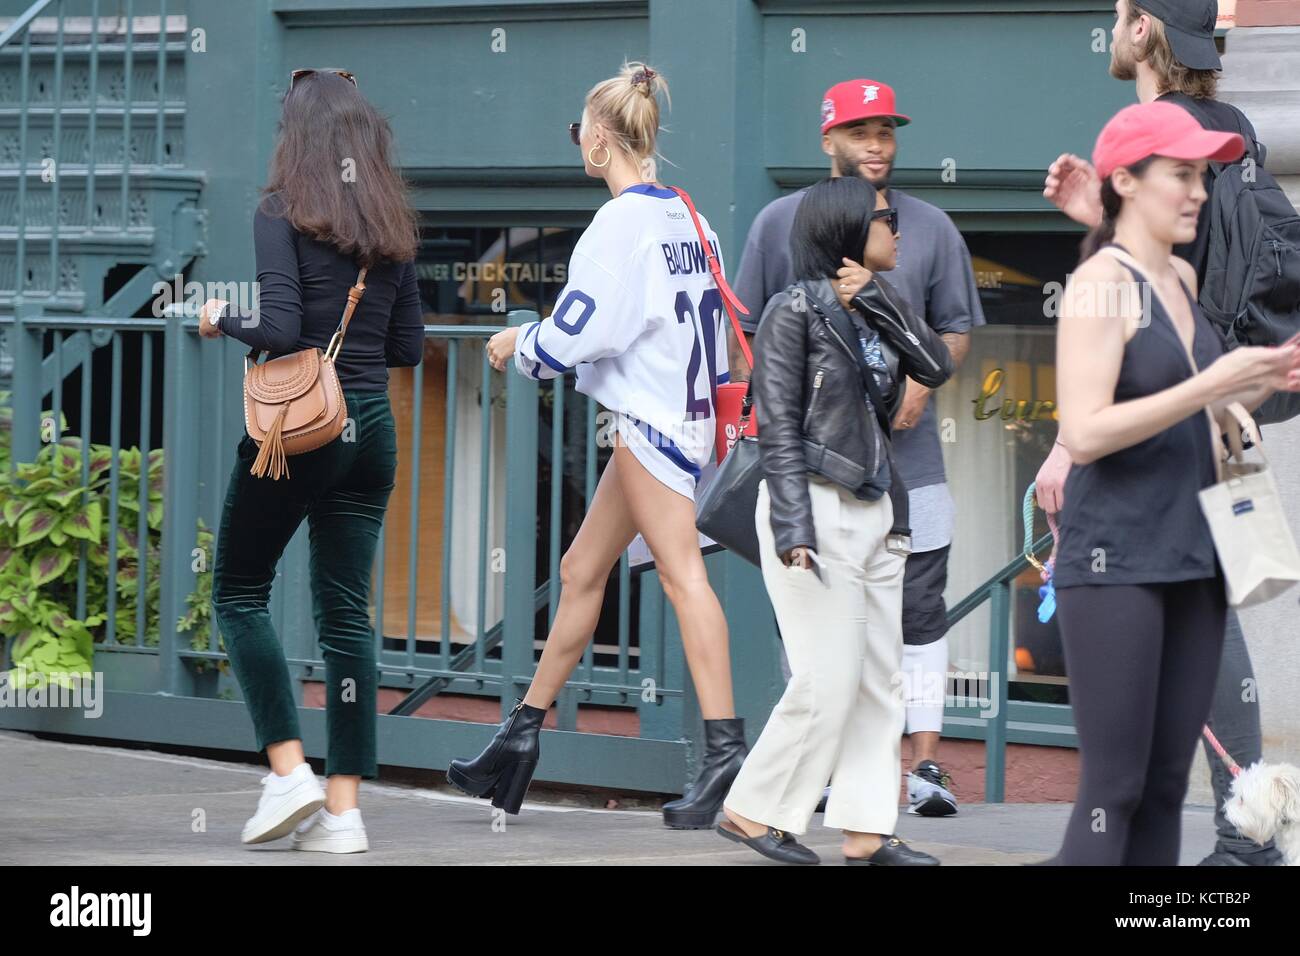 Hailey Baldwin shows off her legs wearing a Toronto Maple Leafs jersey that reads 'Baldwin' on the back  Featuring: Hailey Baldwin Where: Manhattan, New York, United States When: 05 Sep 2017 Credit: TNYF/WENN.com Stock Photo